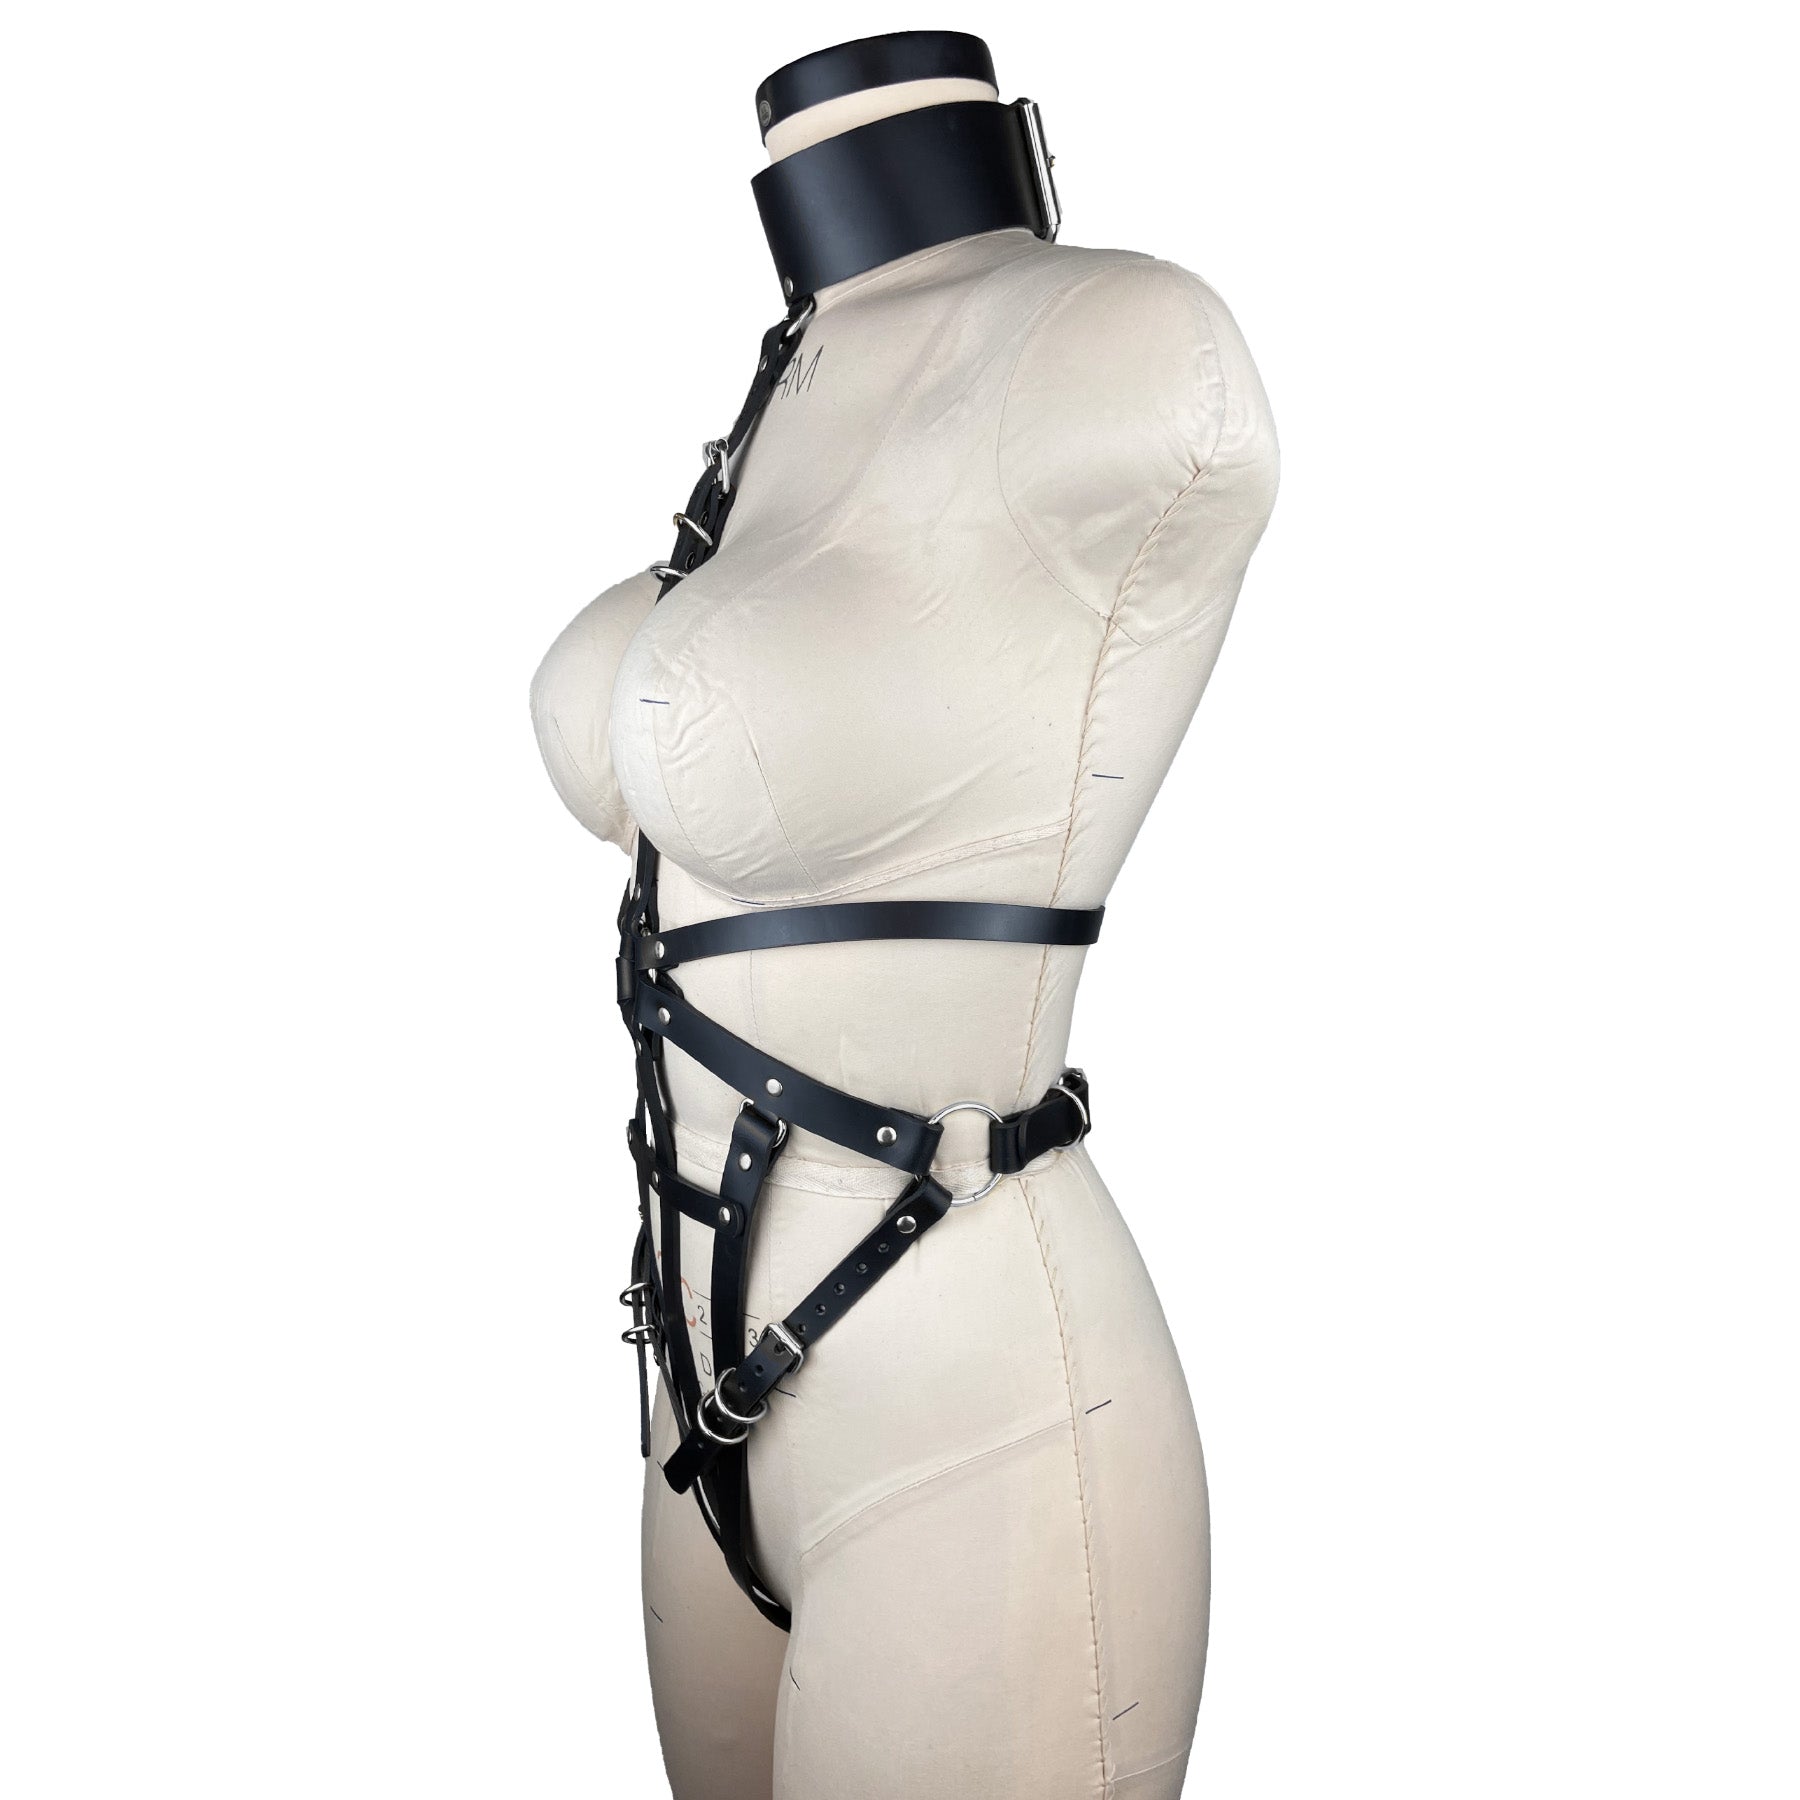 luxury italian leather fashion and fetish body harness, bespoke, made-to-order in nyc, side view